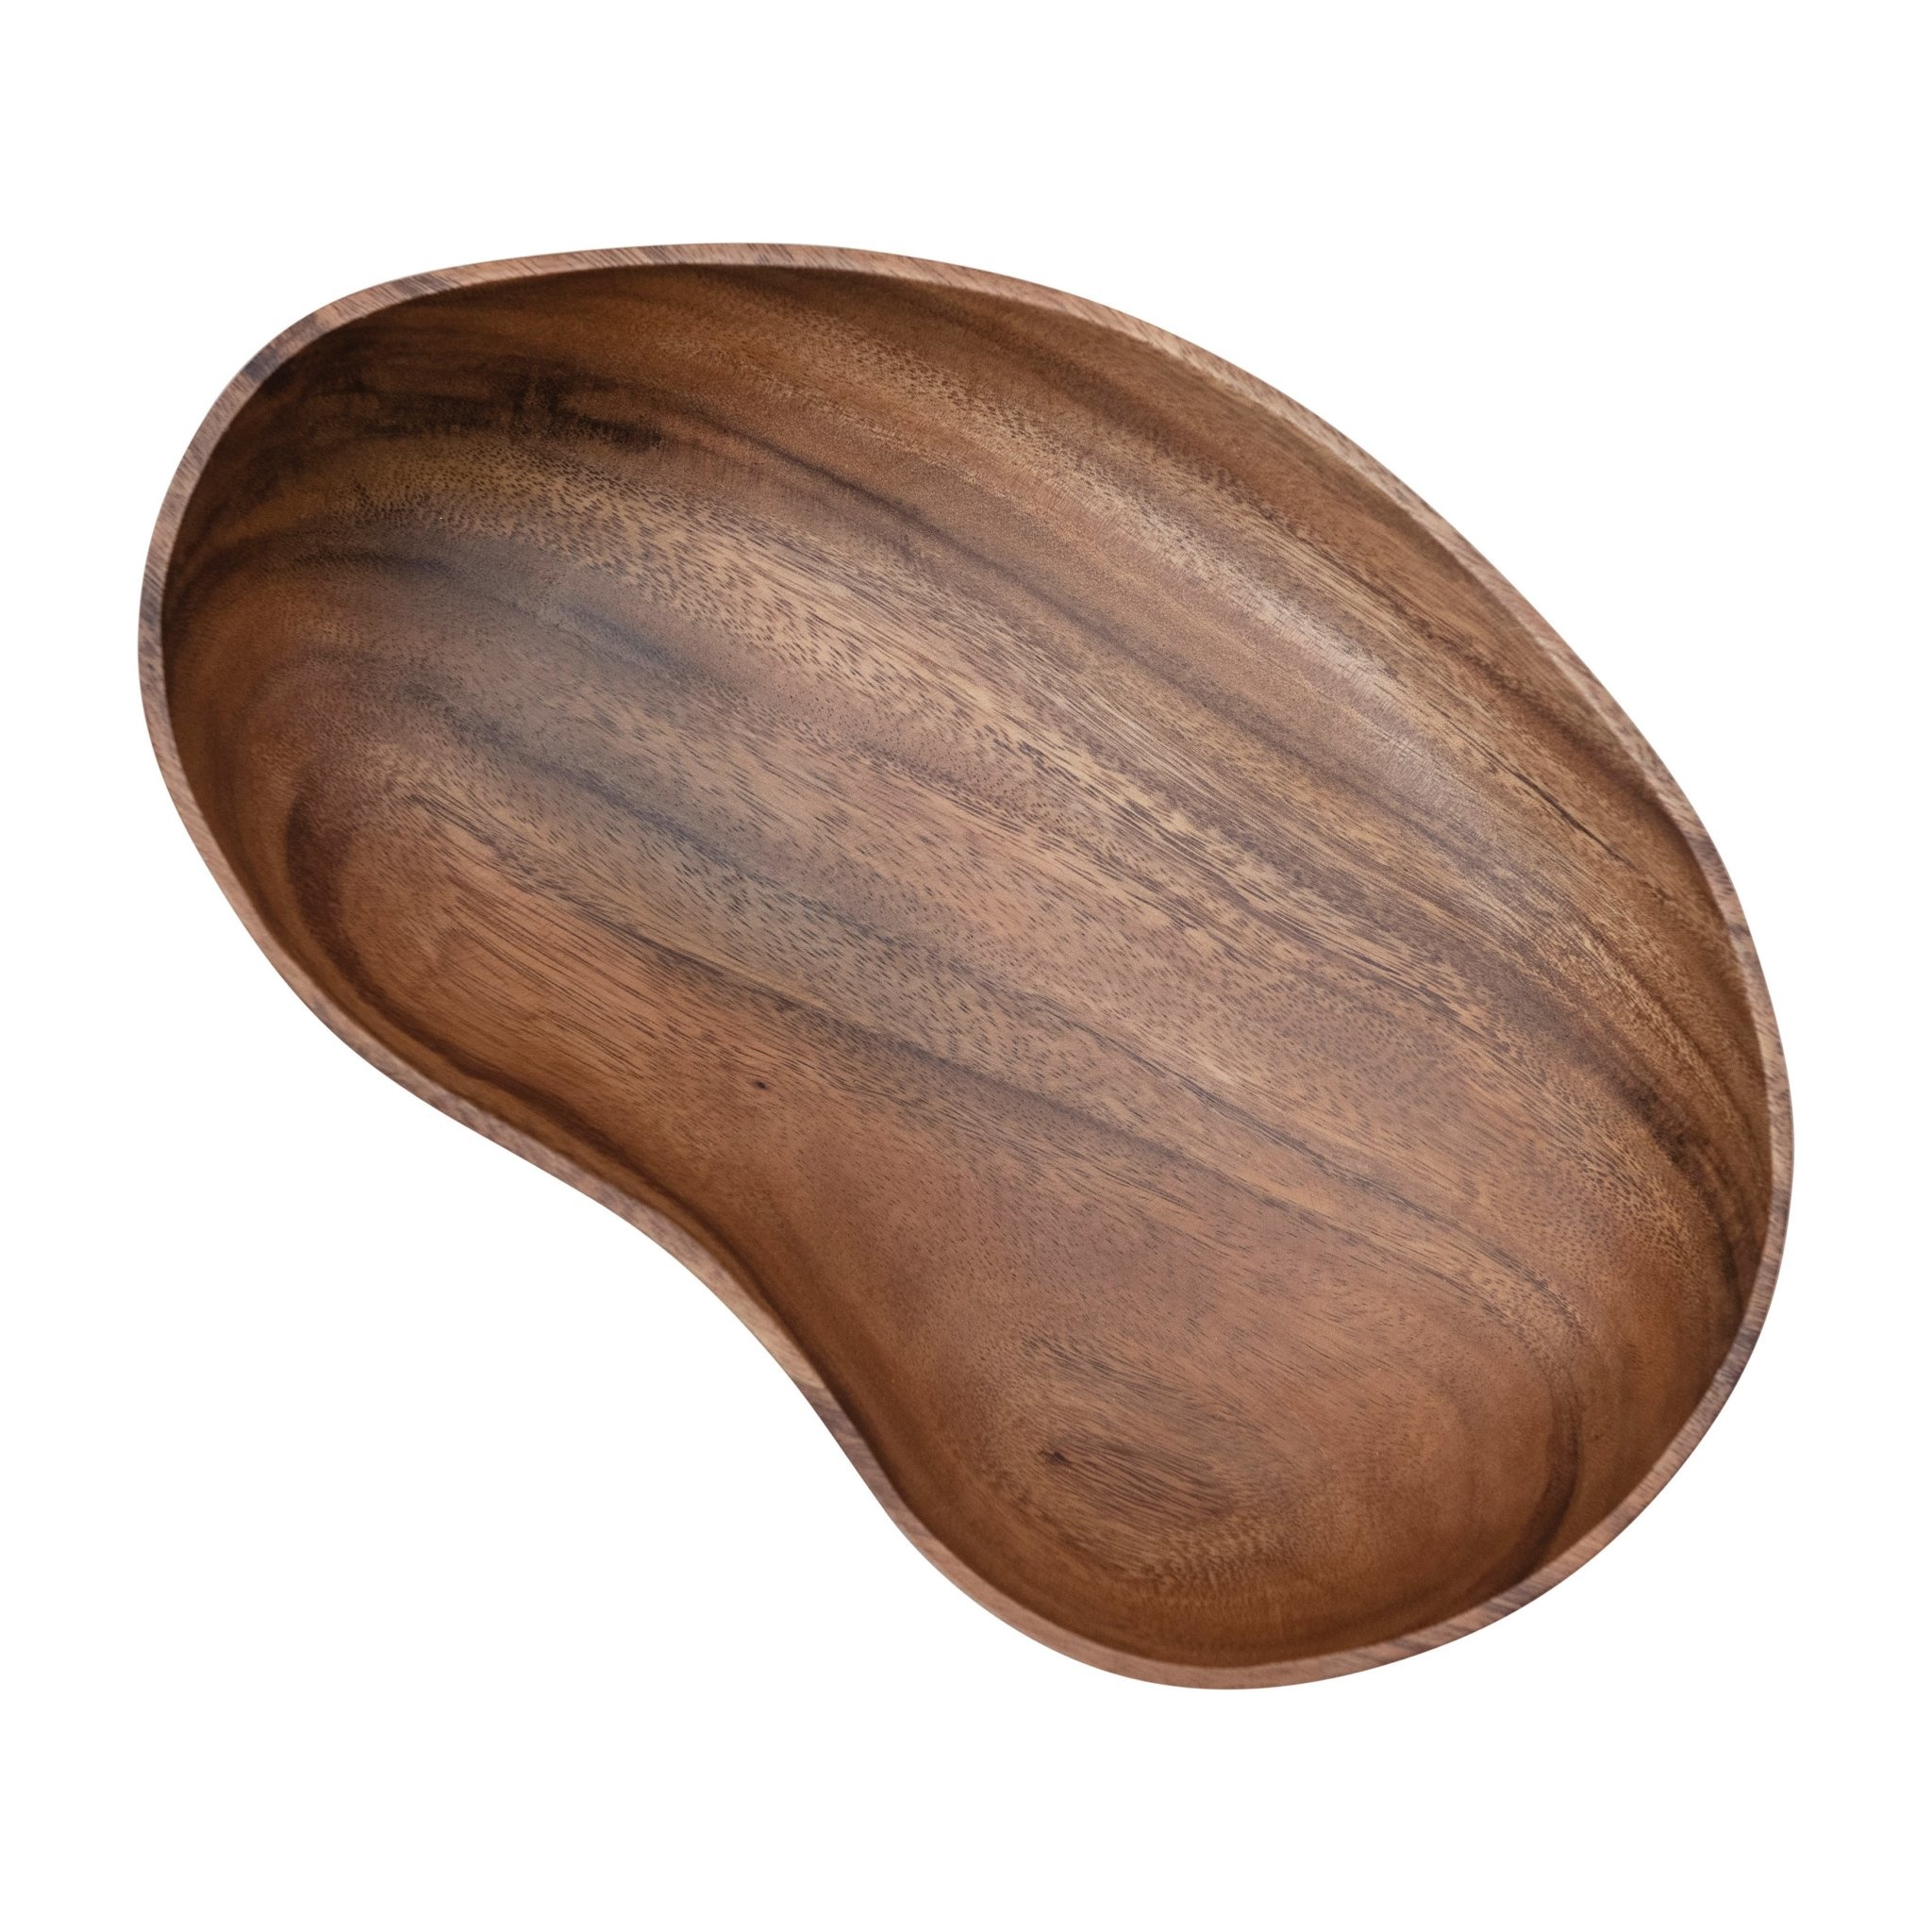 Hand-Carved Acacia Wood Bowl, Natural, Available for local pick up